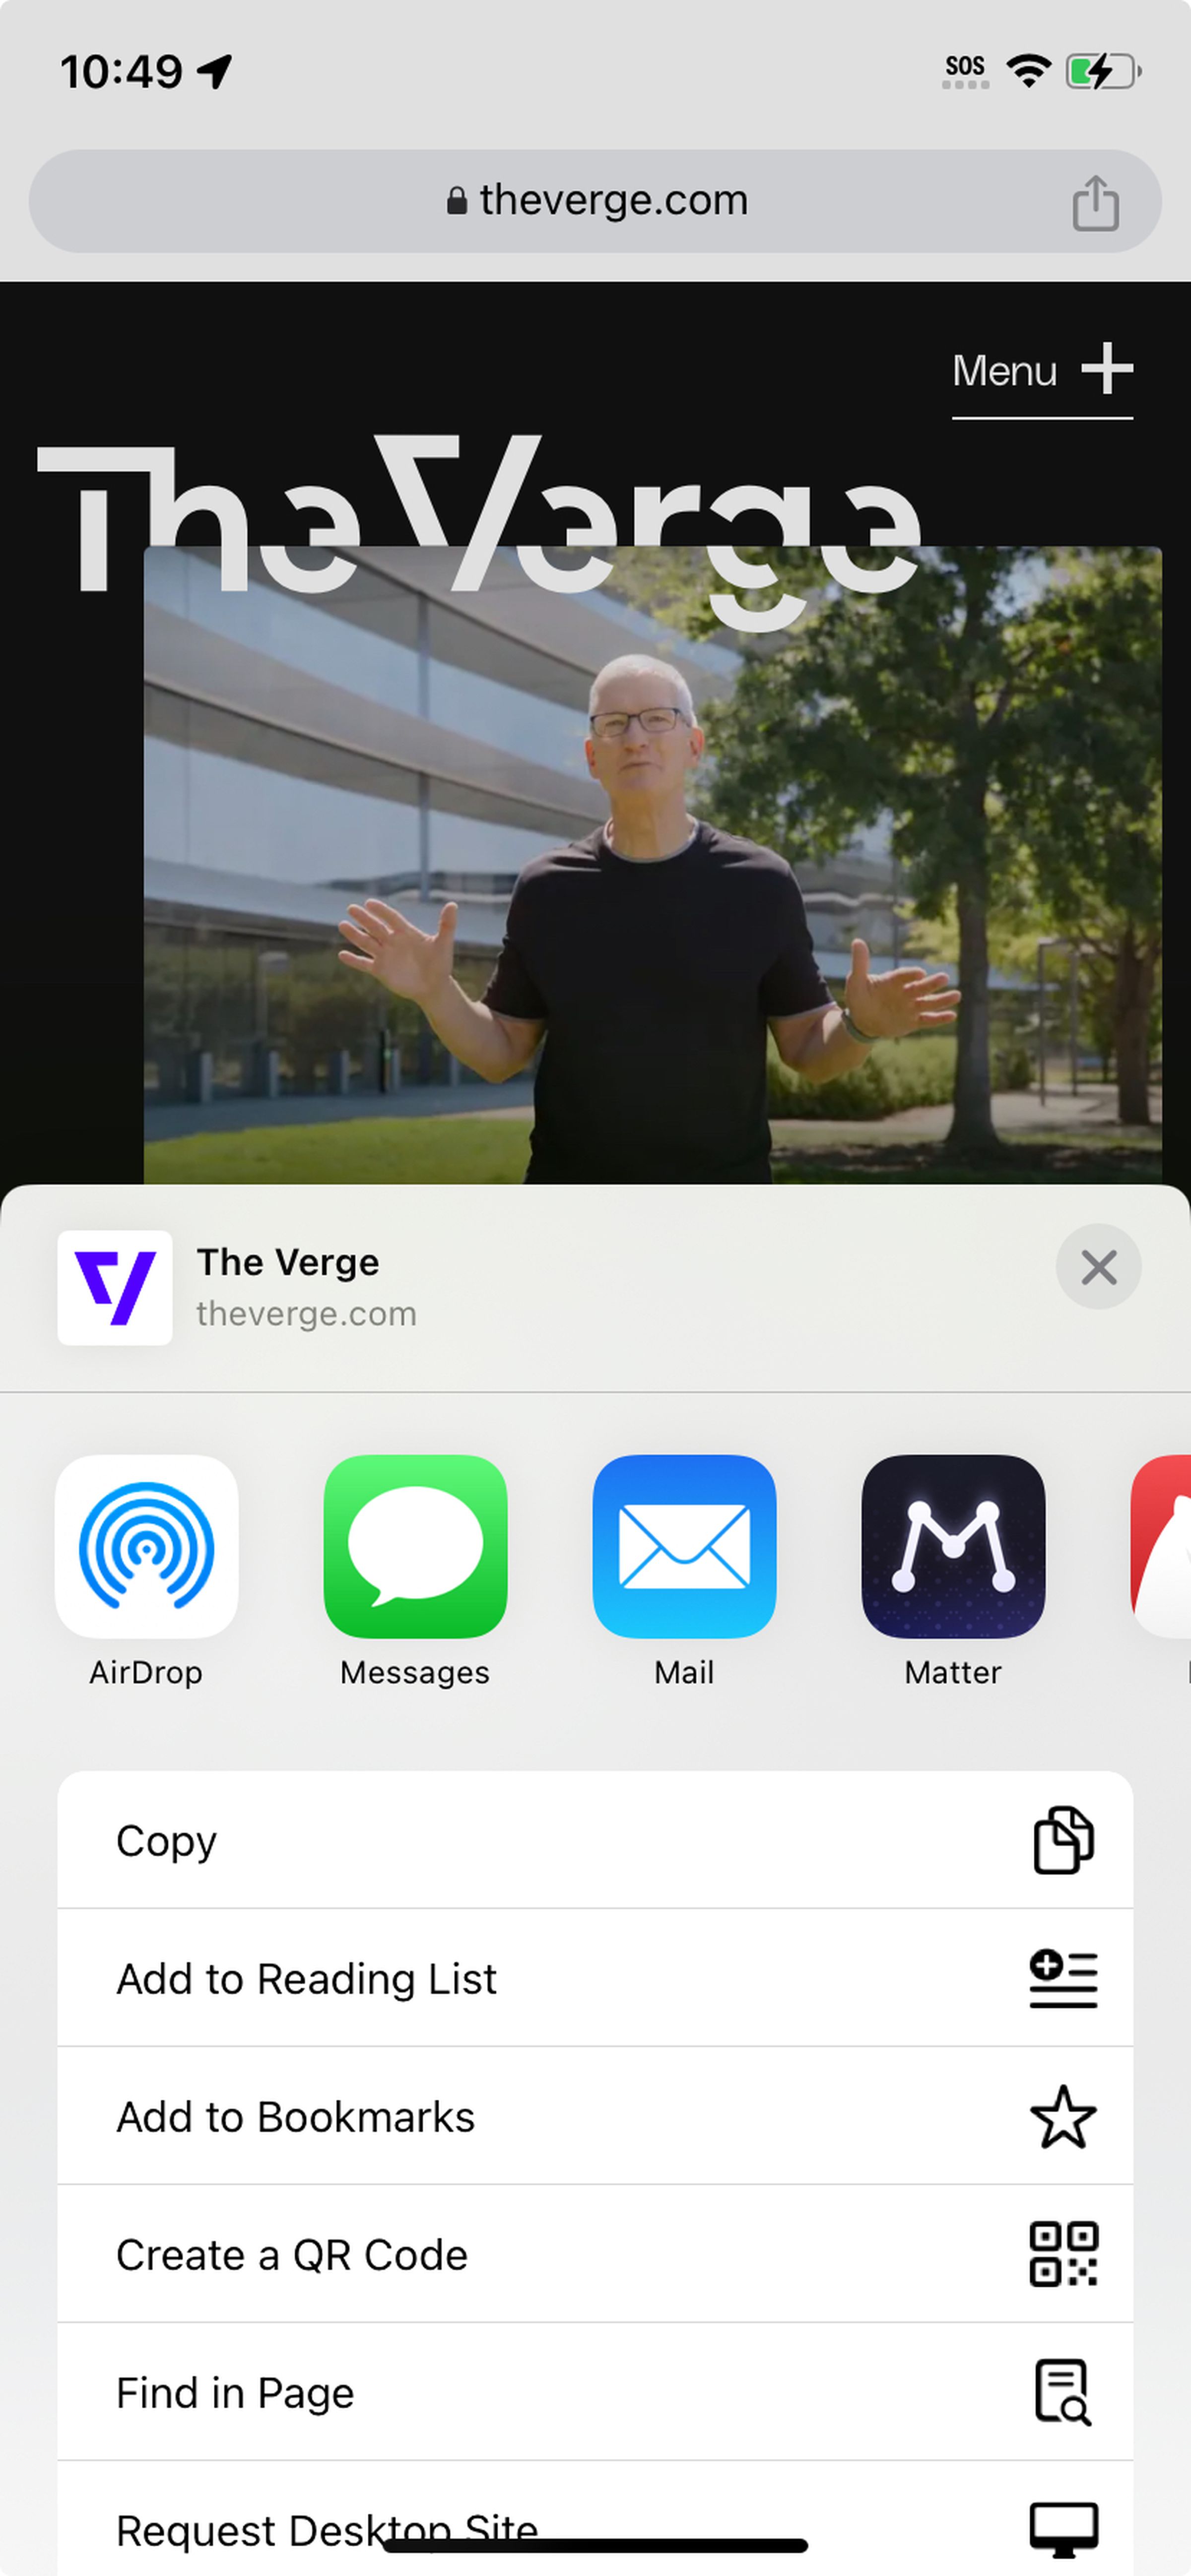 Mobile screen with a screenshot from The Verge on top, and a pop-up menu with several app icons across the top and a menu including Create a QR Code below that.